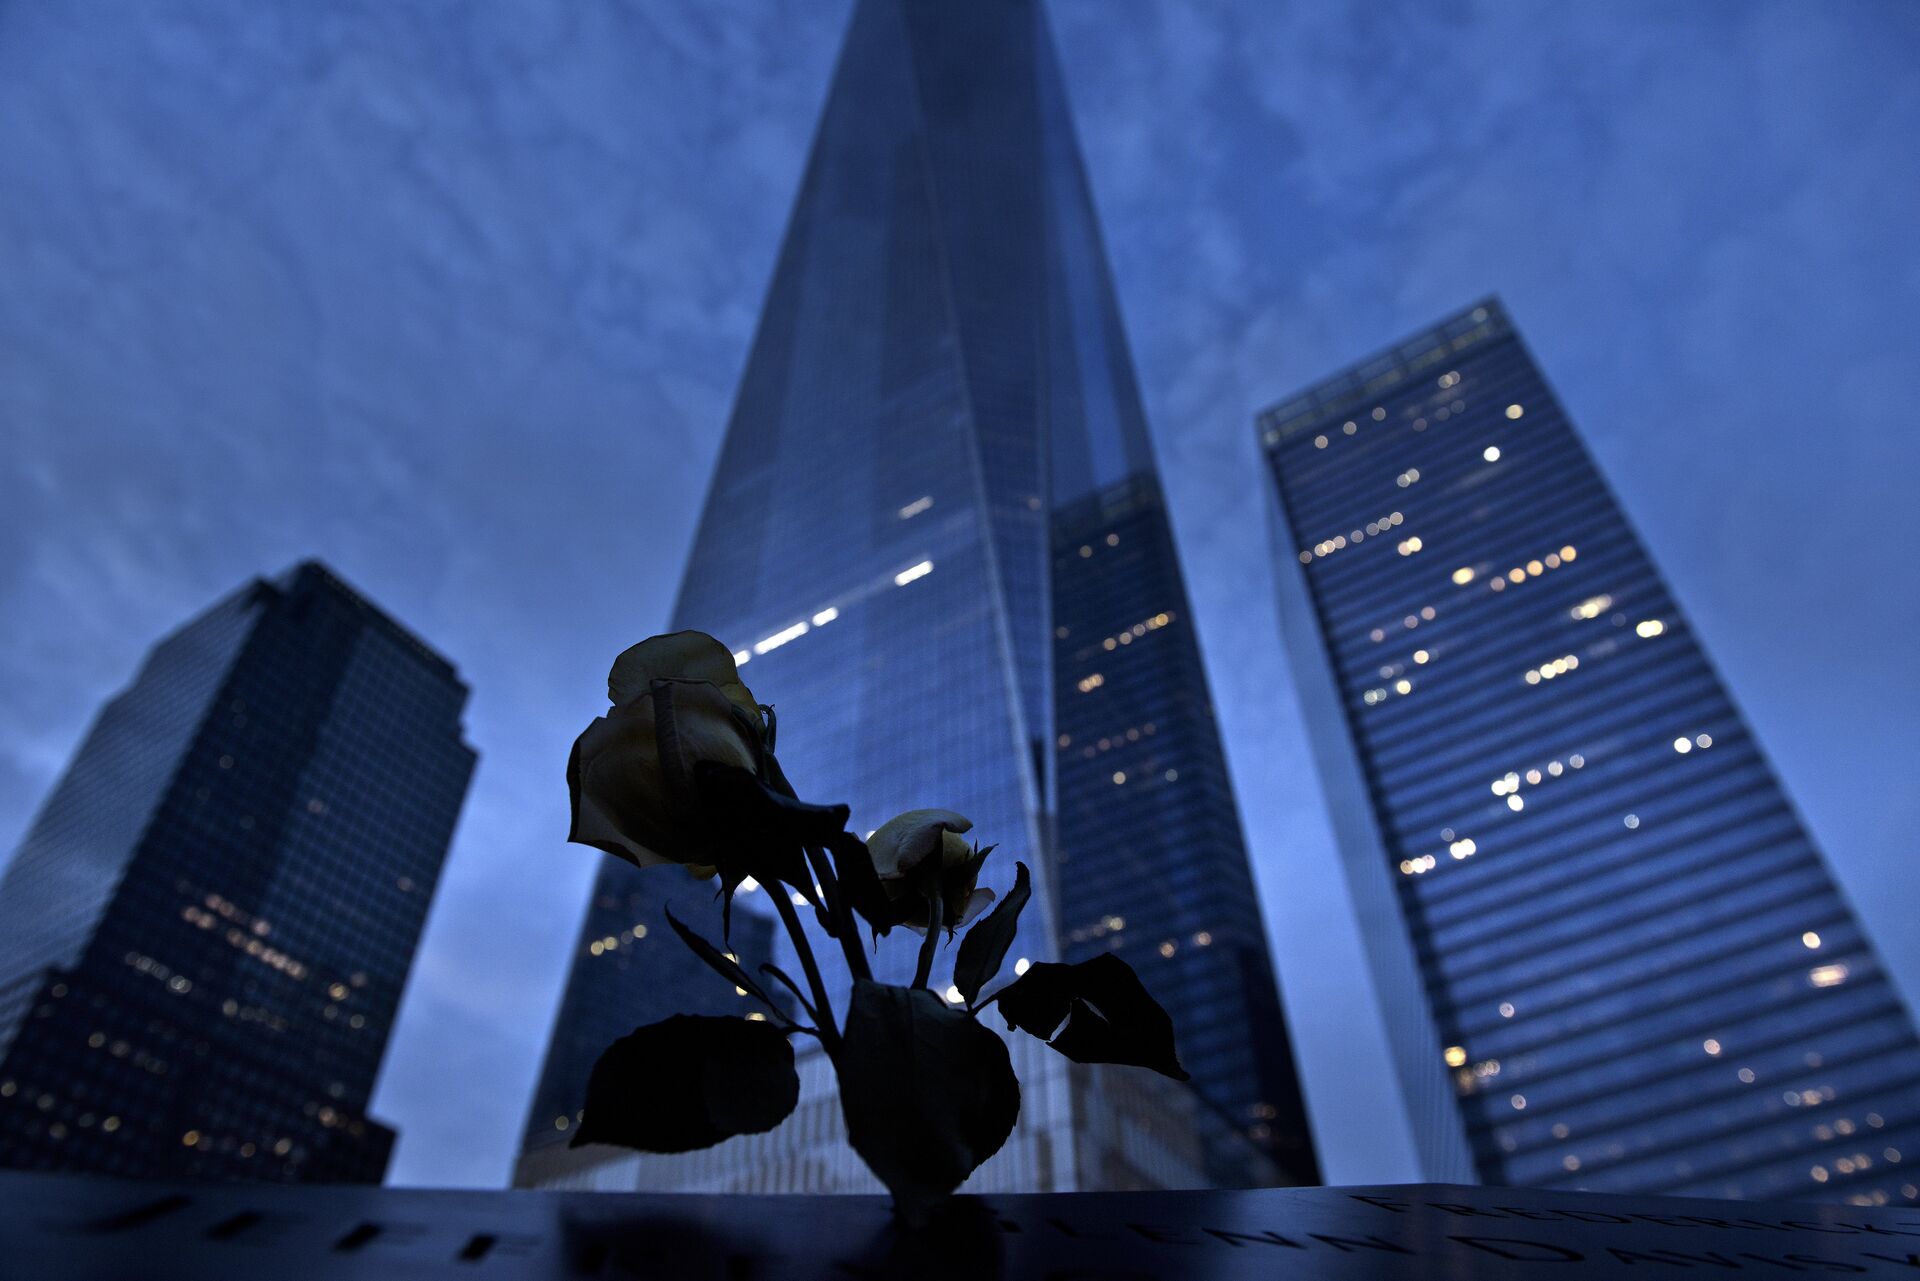 A view of One World Trade Center from the North Pool, which marks the former site of the North Tower of the World Trade Center, at Ground Zero the night before the 15th anniversary of the September 11, 2001 terrorist attacks in the United States in New York - Sputnik International, 1920, 13.10.2021